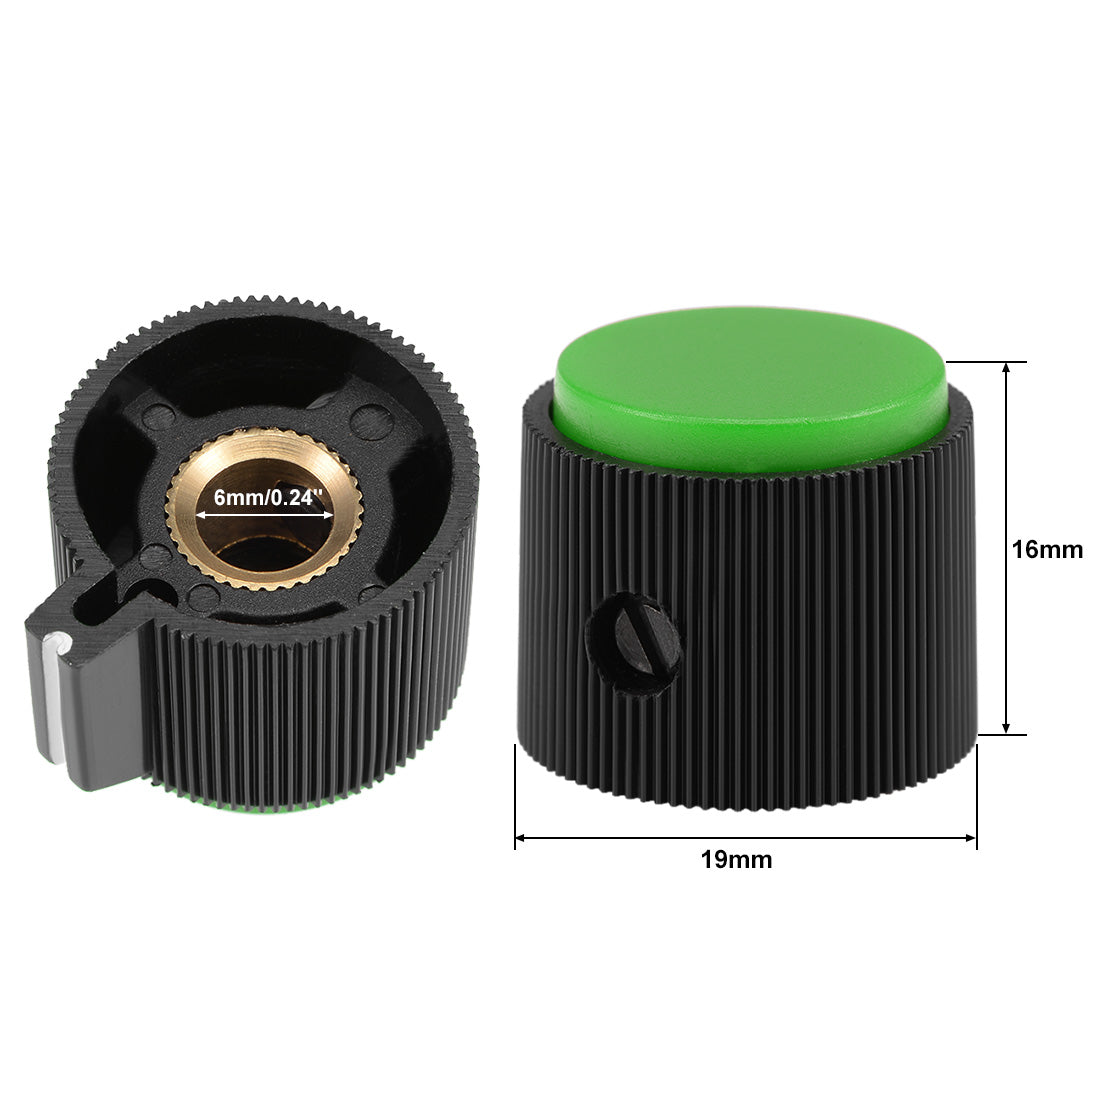 Uxcell Uxcell 2Pcs 19x16mm bachelite Potentiometer Volume Control Rotary Knob for 6mm Dia Hole Green